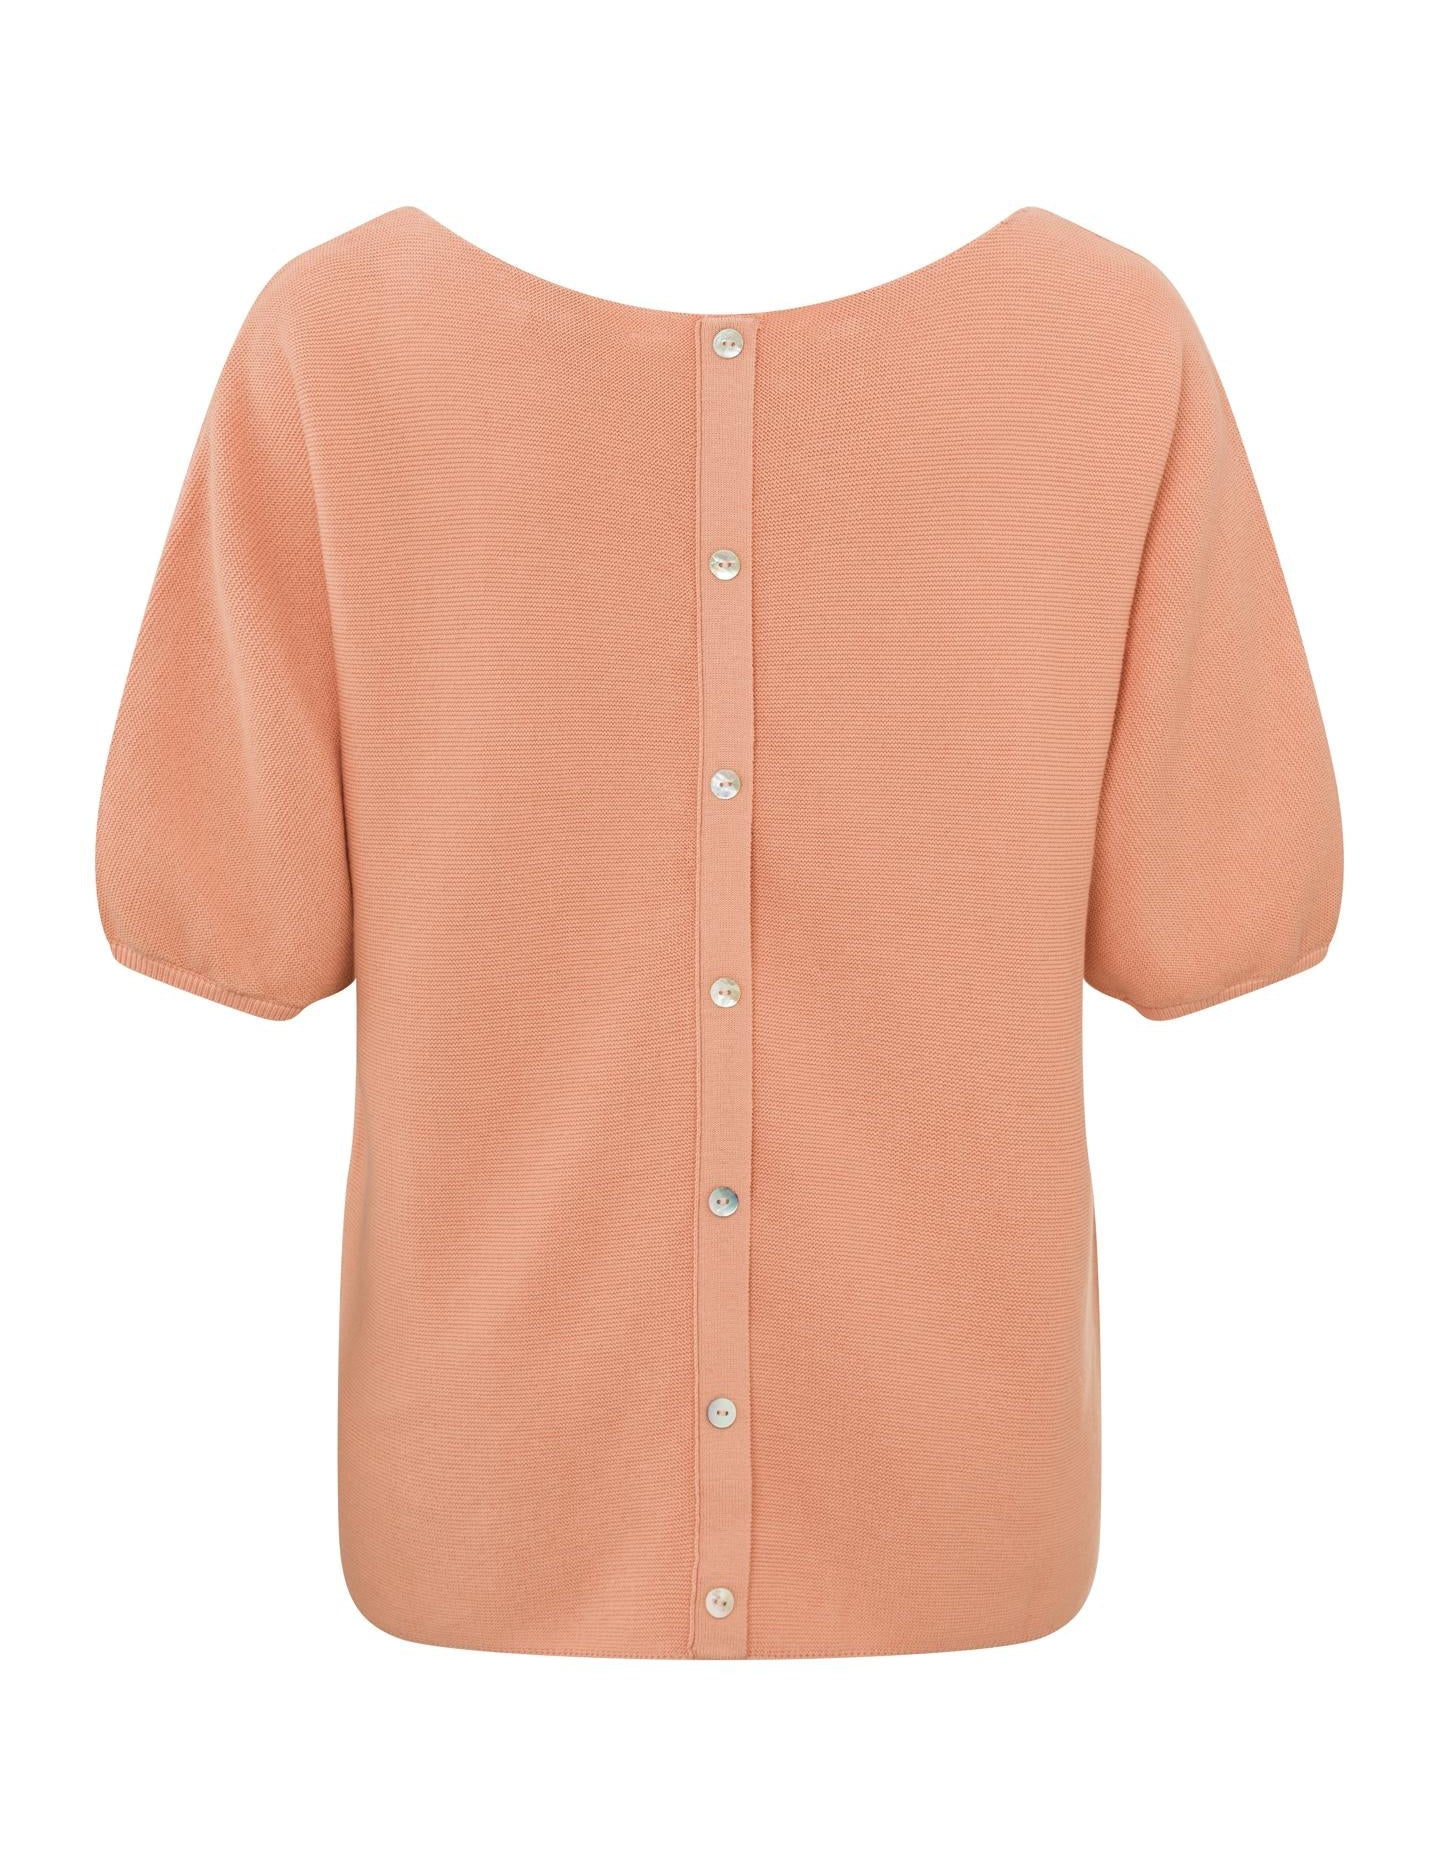 sweater-with-boatneck-and-short-balloon-sleeves-in-cotton-dusty-coral-orange_2880x_ae8abe89-c788-4dda-b167-9a24398794c2.jpg